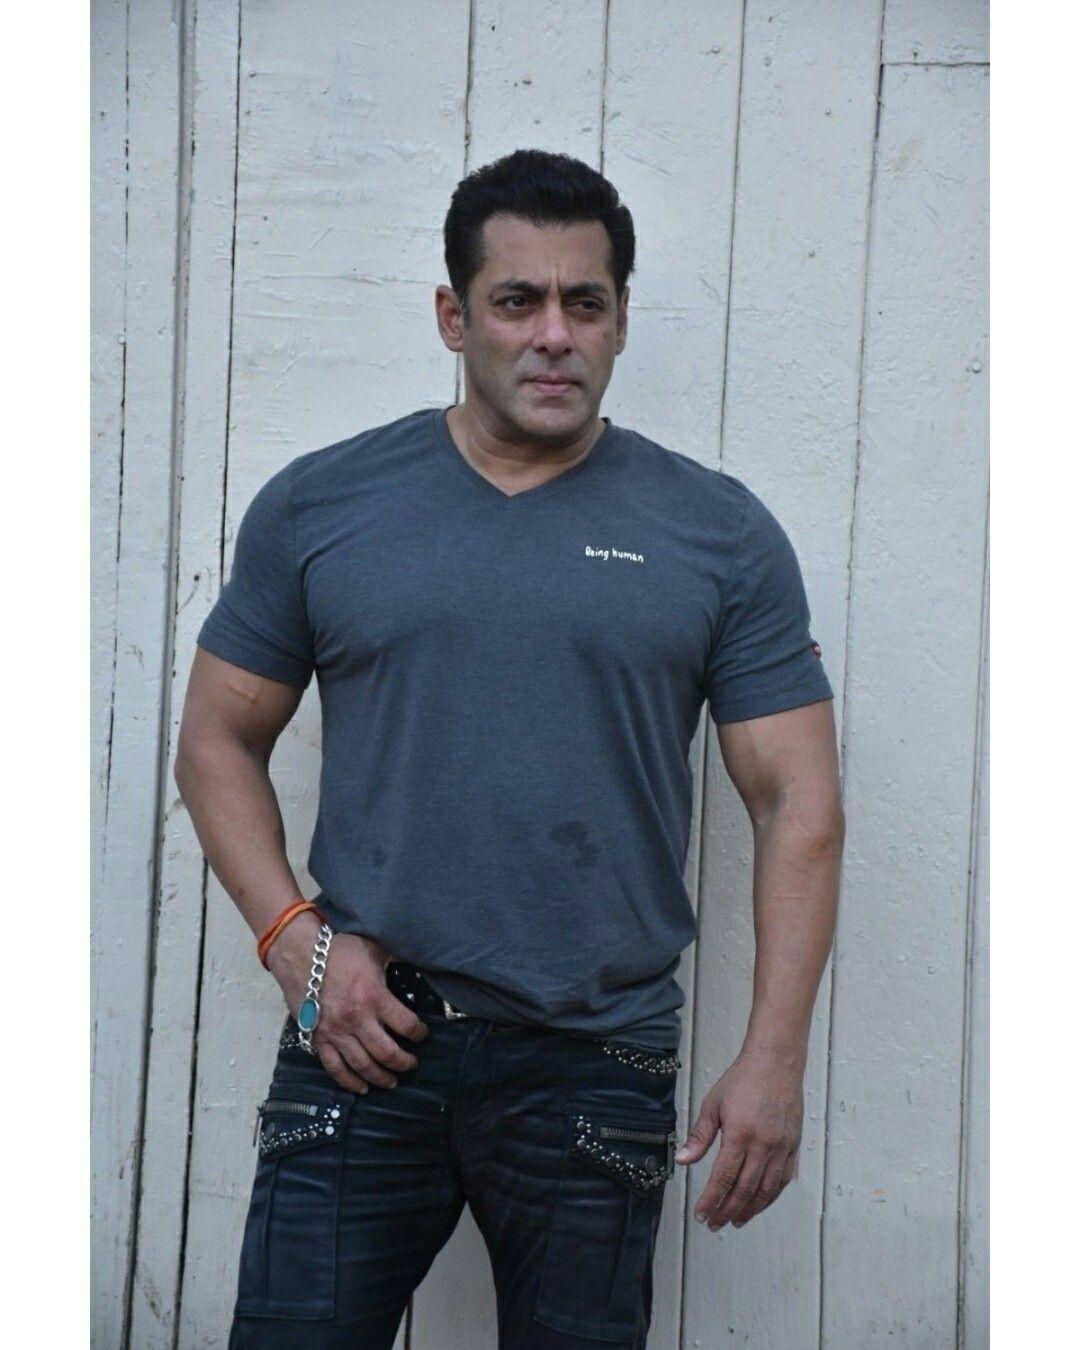 Salman Khan during the promotion of Bharat